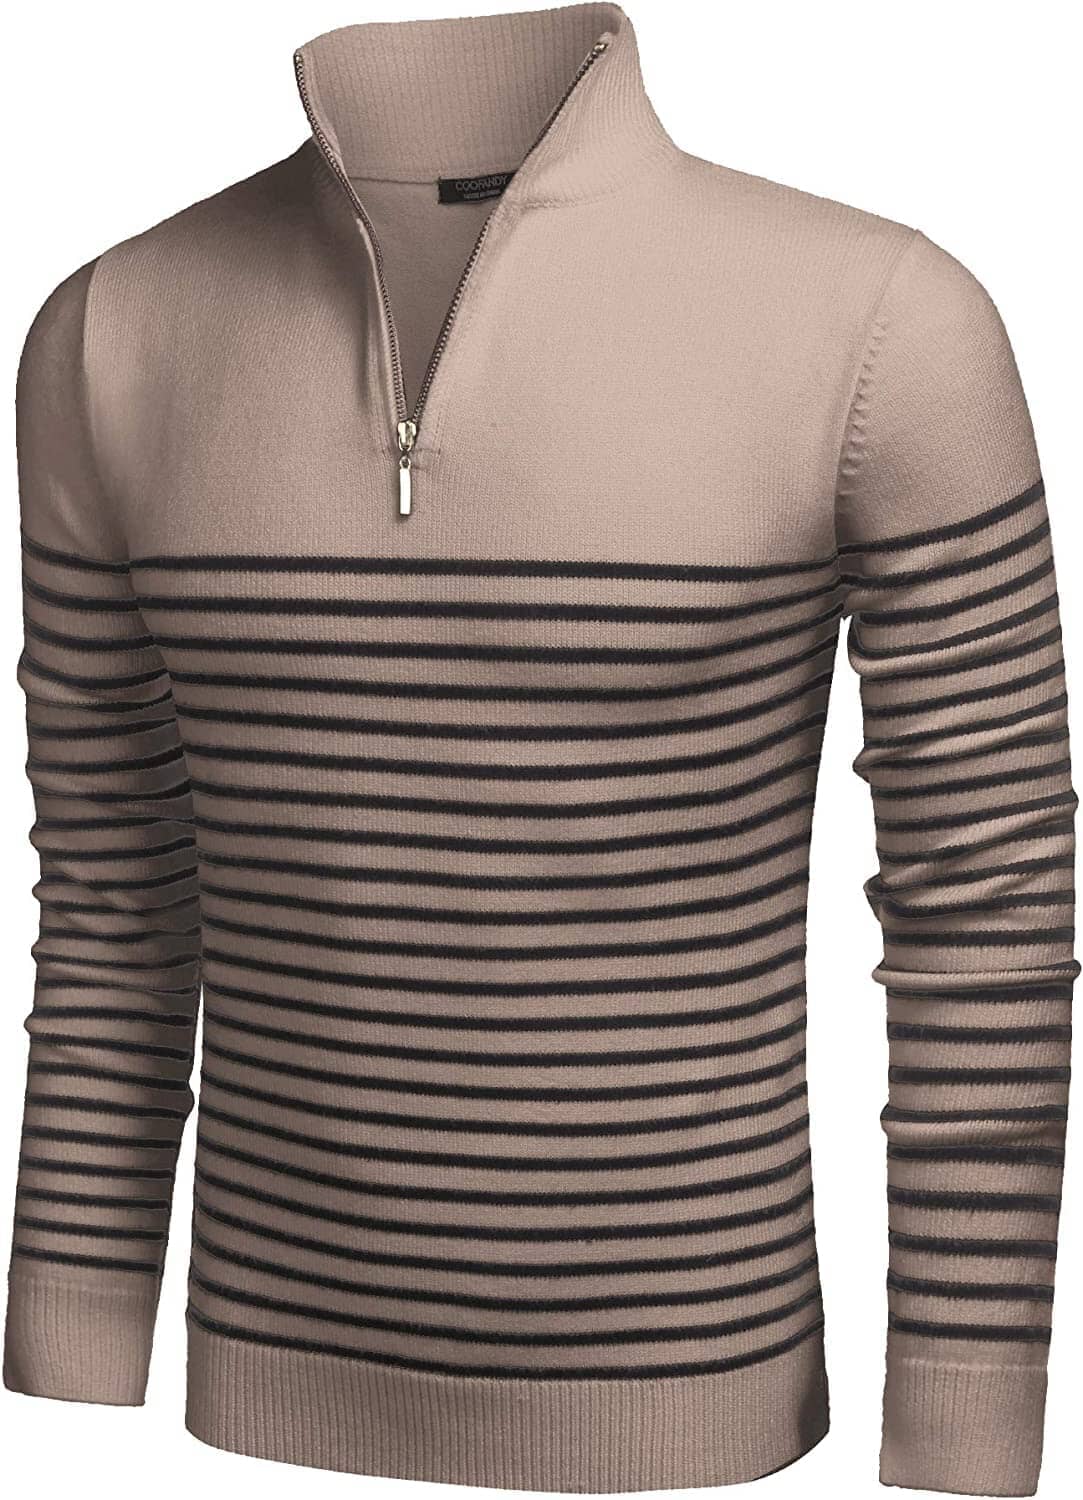 Striped Zip Up Mock Neck Pullover Sweaters (US Only) Sweaters COOFANDY Store Khaki S 